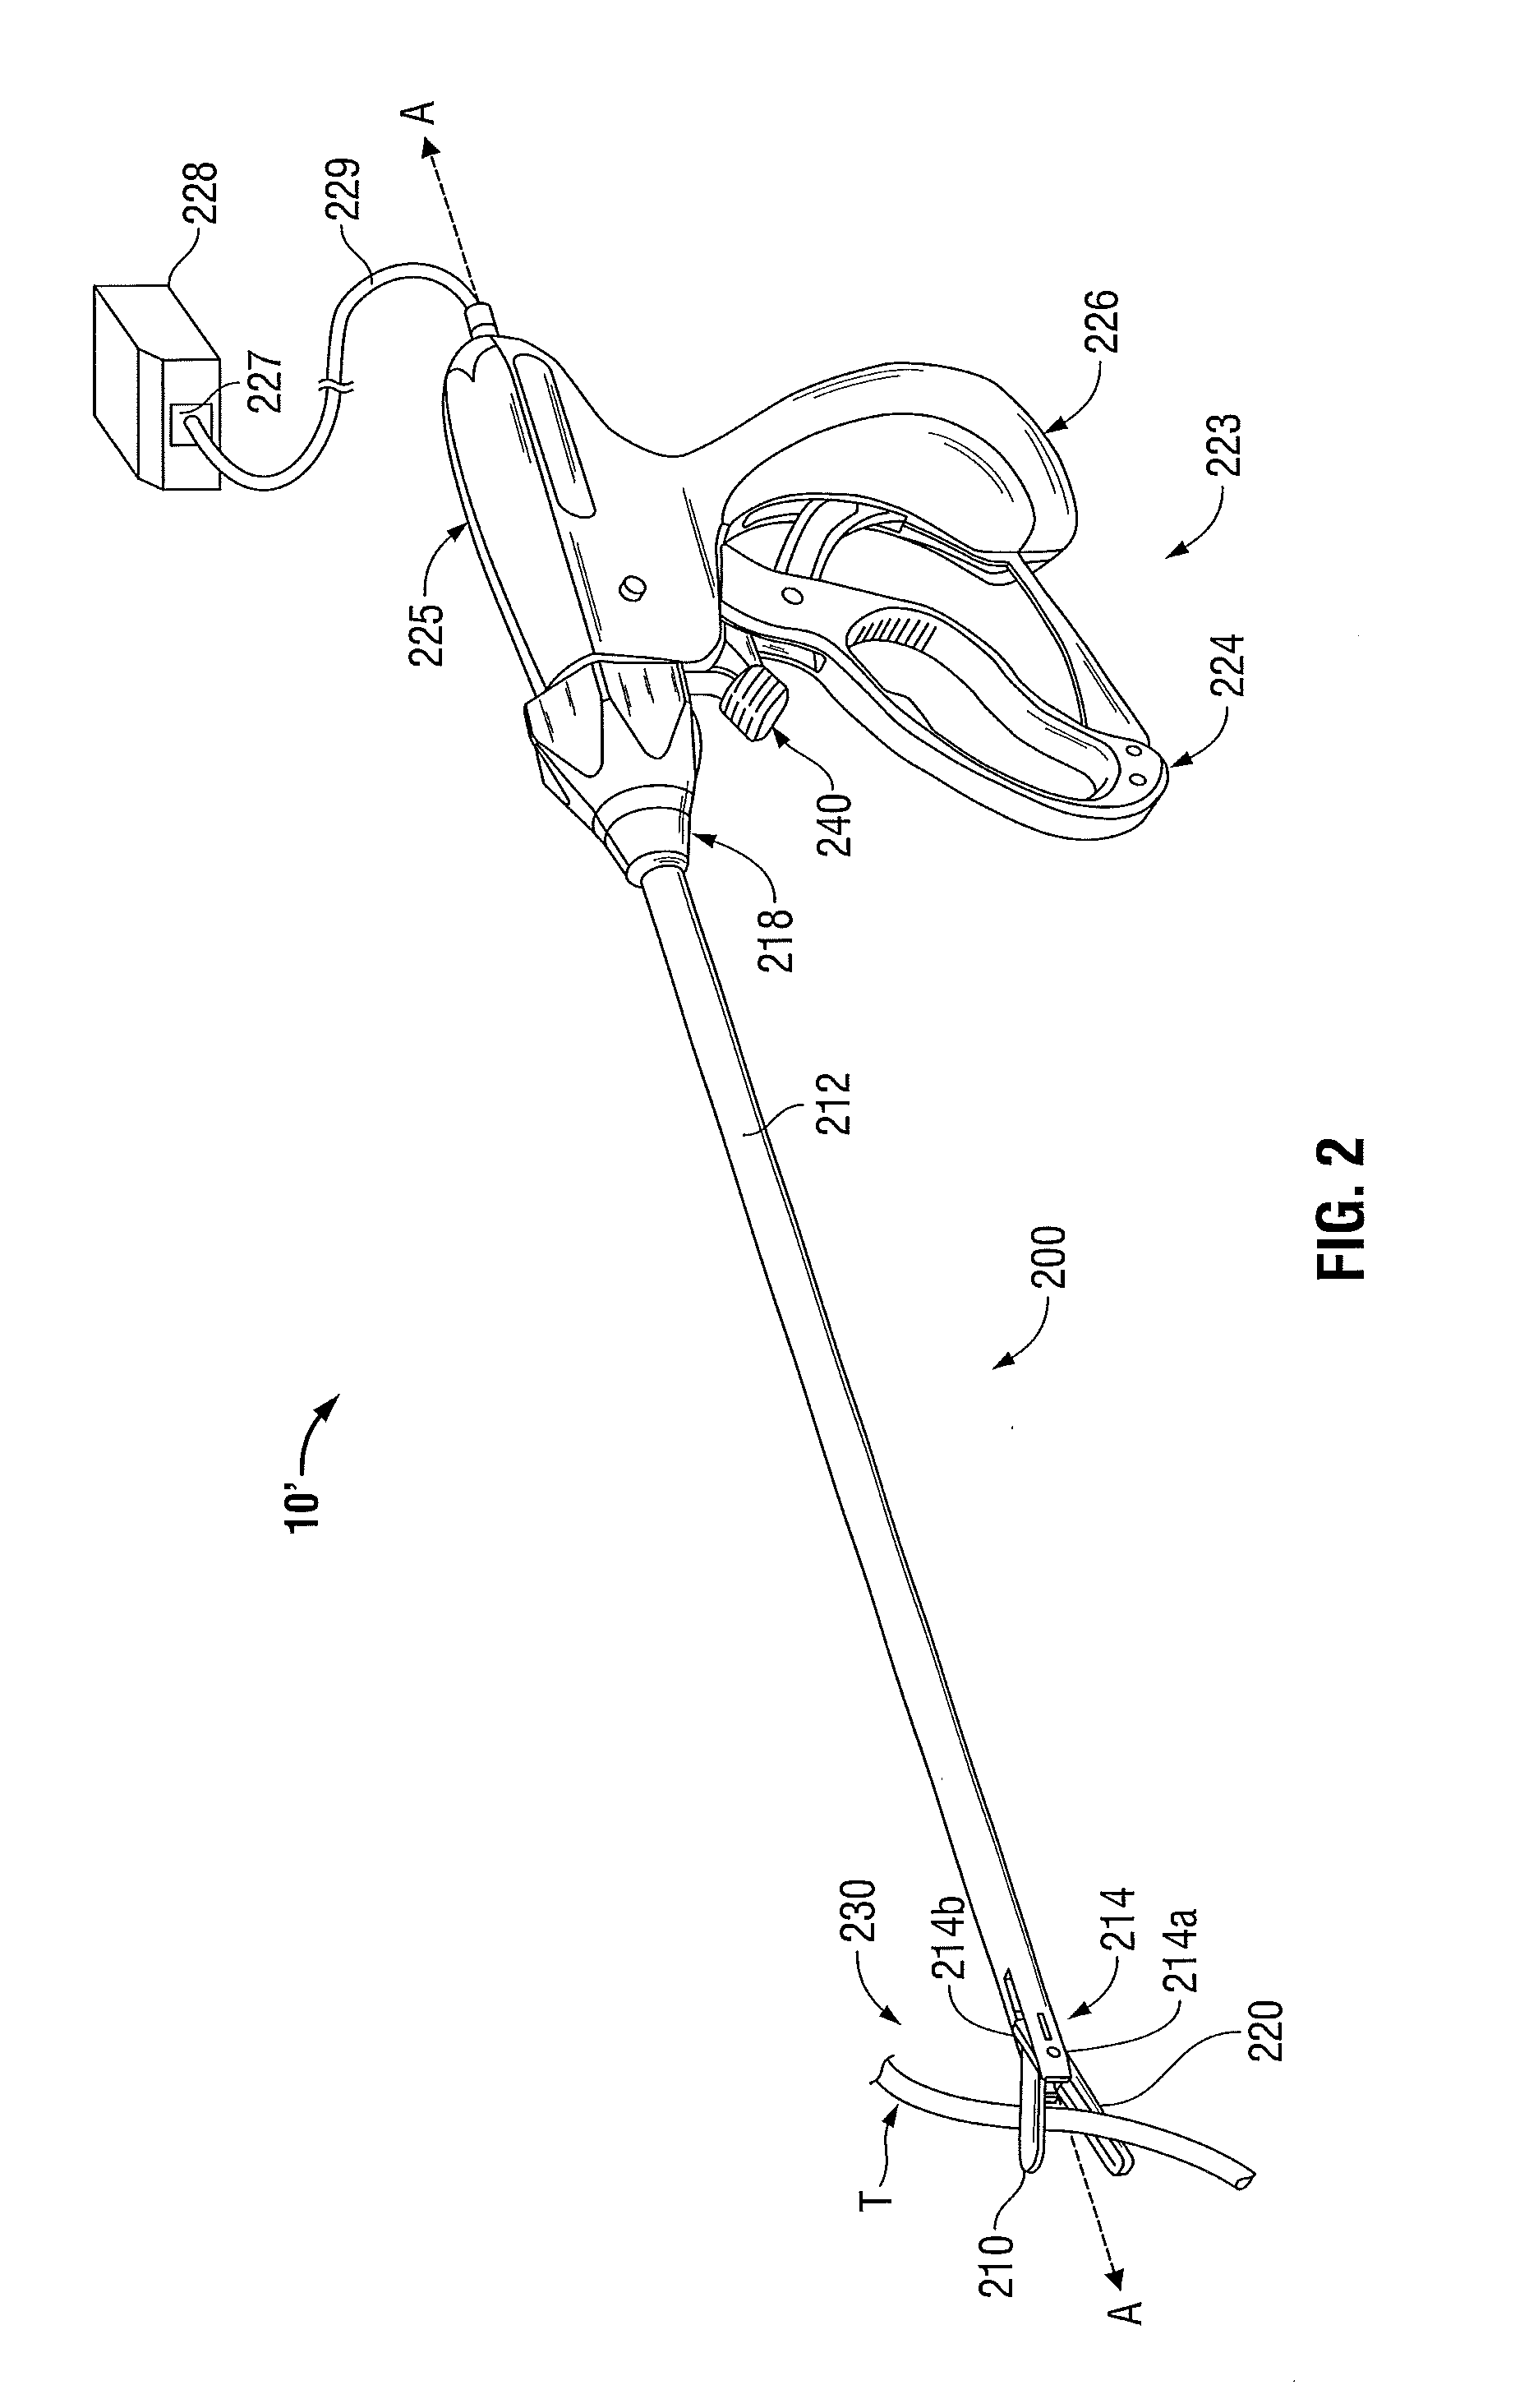 Method for manufacturing vessel sealing instrument with reduced thermal spread